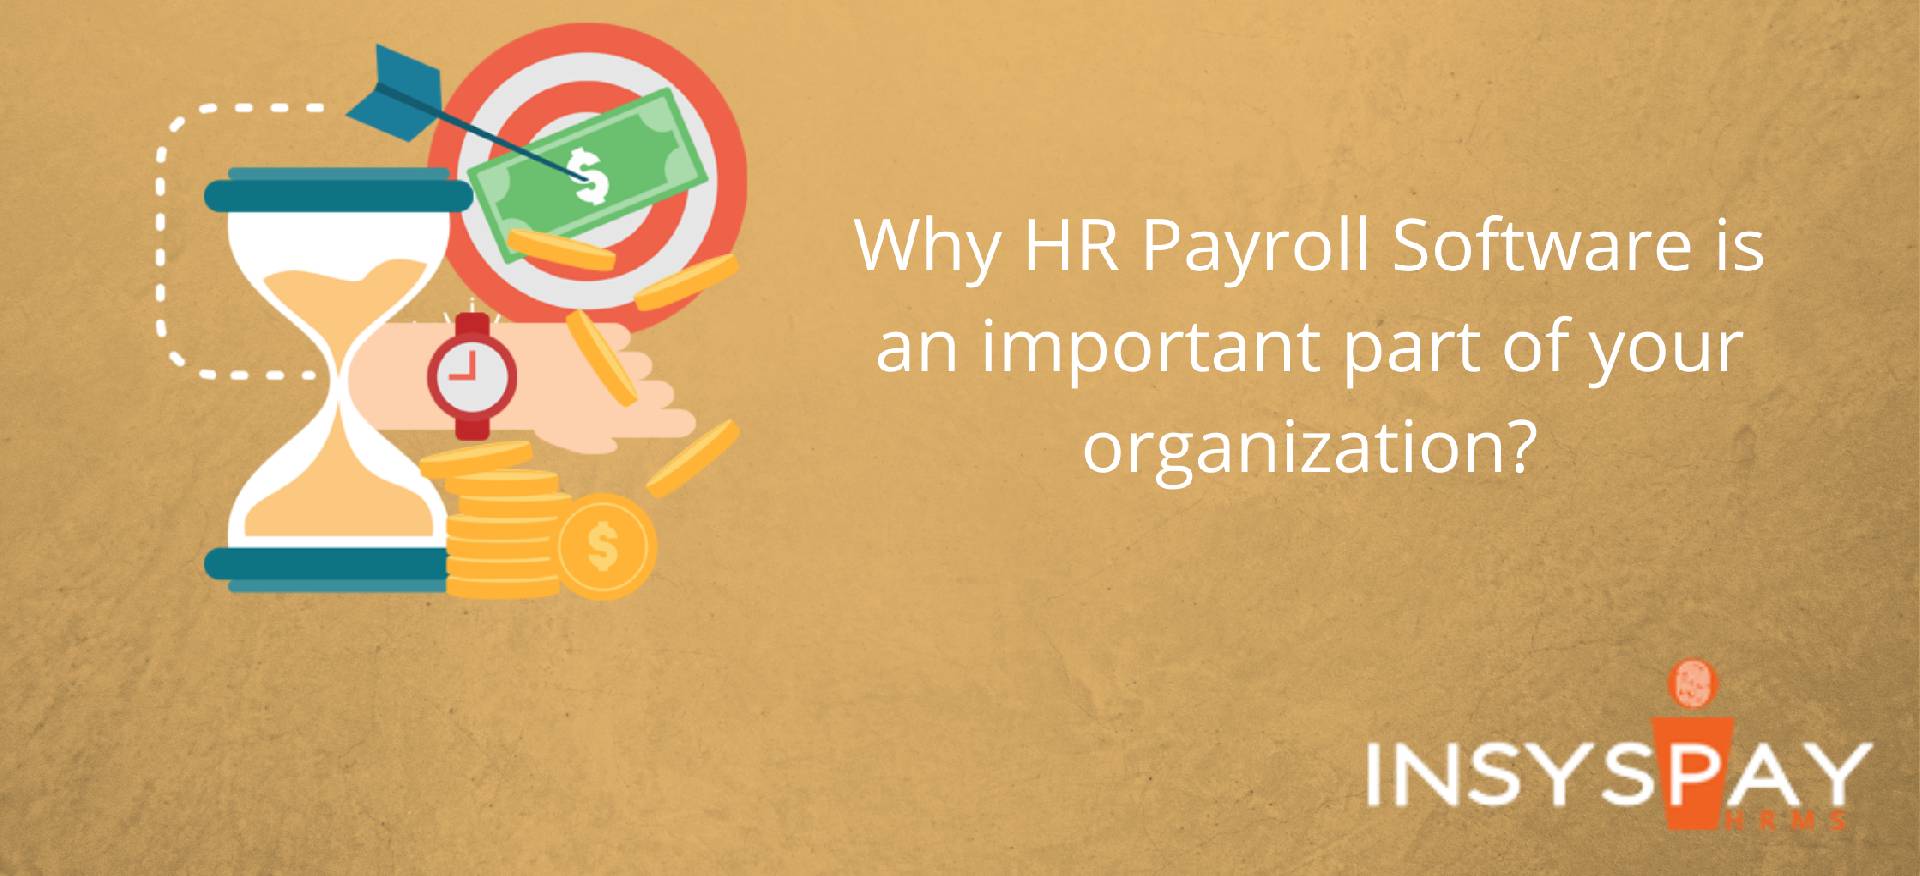 Why HR Payroll Software is an important part of your organization